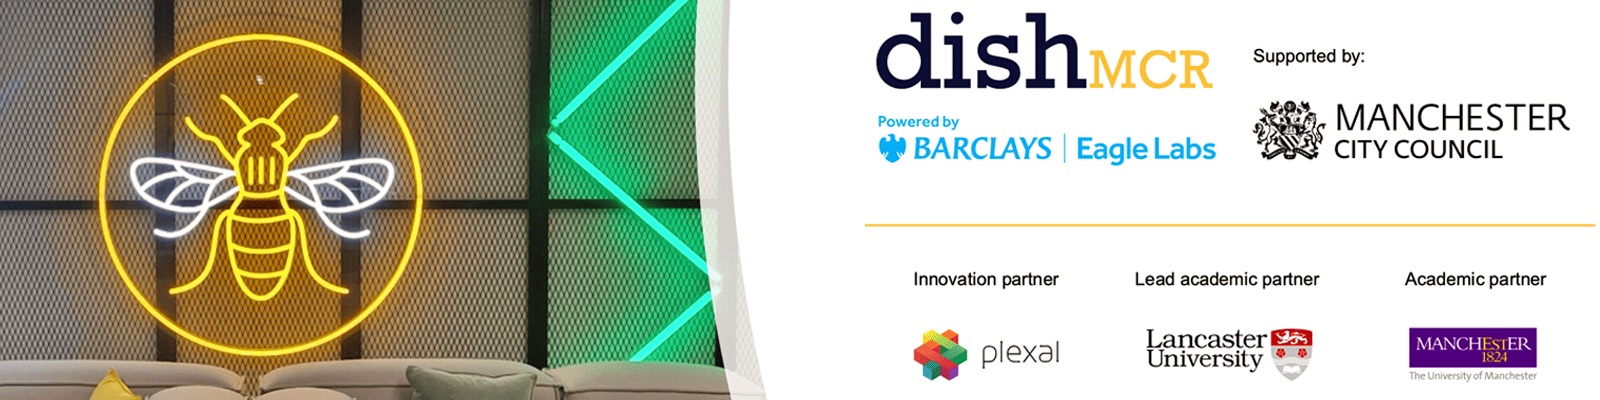 dishMCR, supported by Barclays Eagle Labs & Manchester City Council